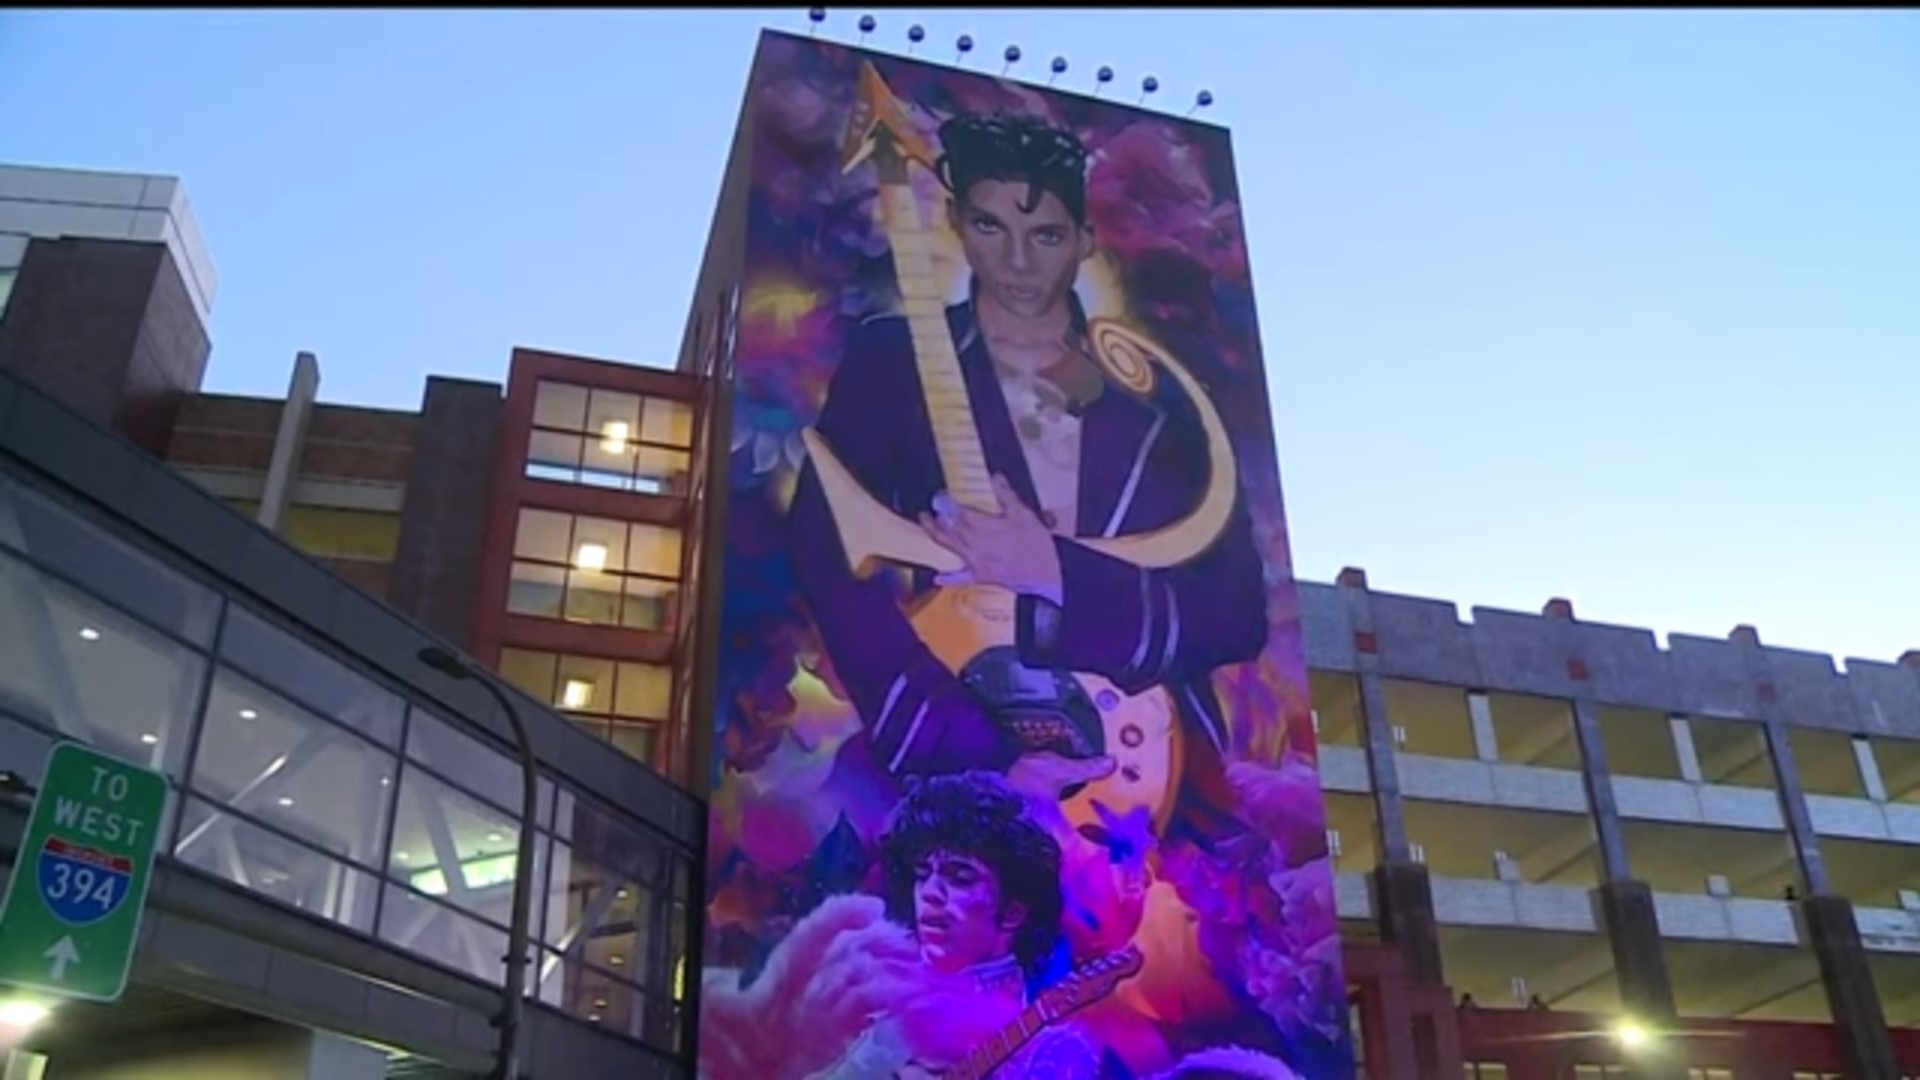 Fans out at the unveiling of Prince's new mural in downtown Minneapolis Thursday evening described him as a global icon and a Minnesota treasure.